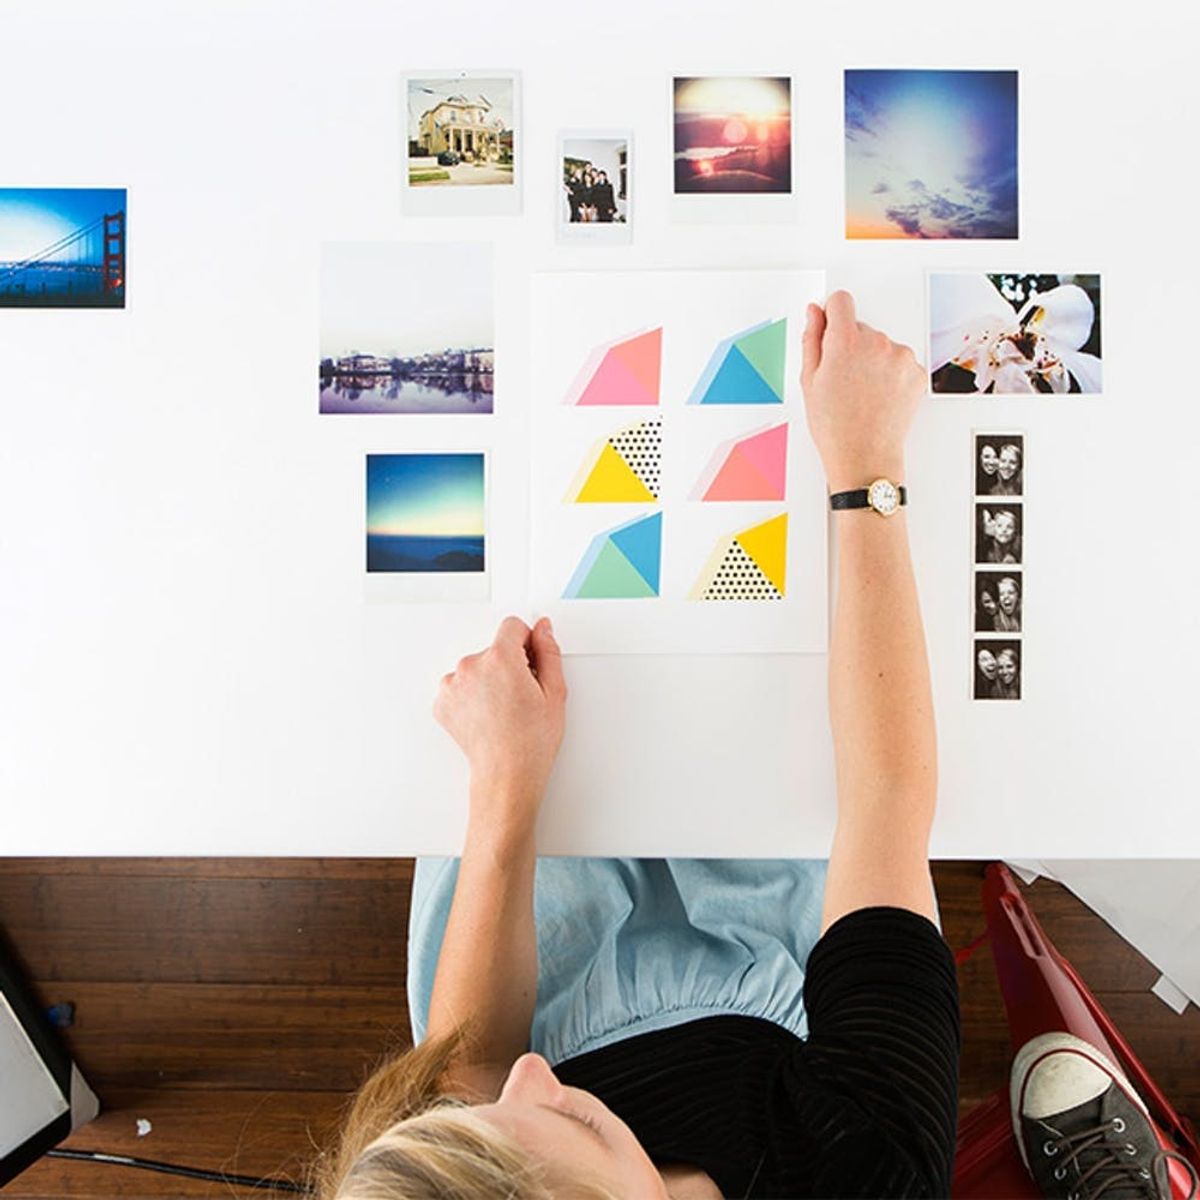 13 Productivity Tips to Make 2015 Your Best Year Yet